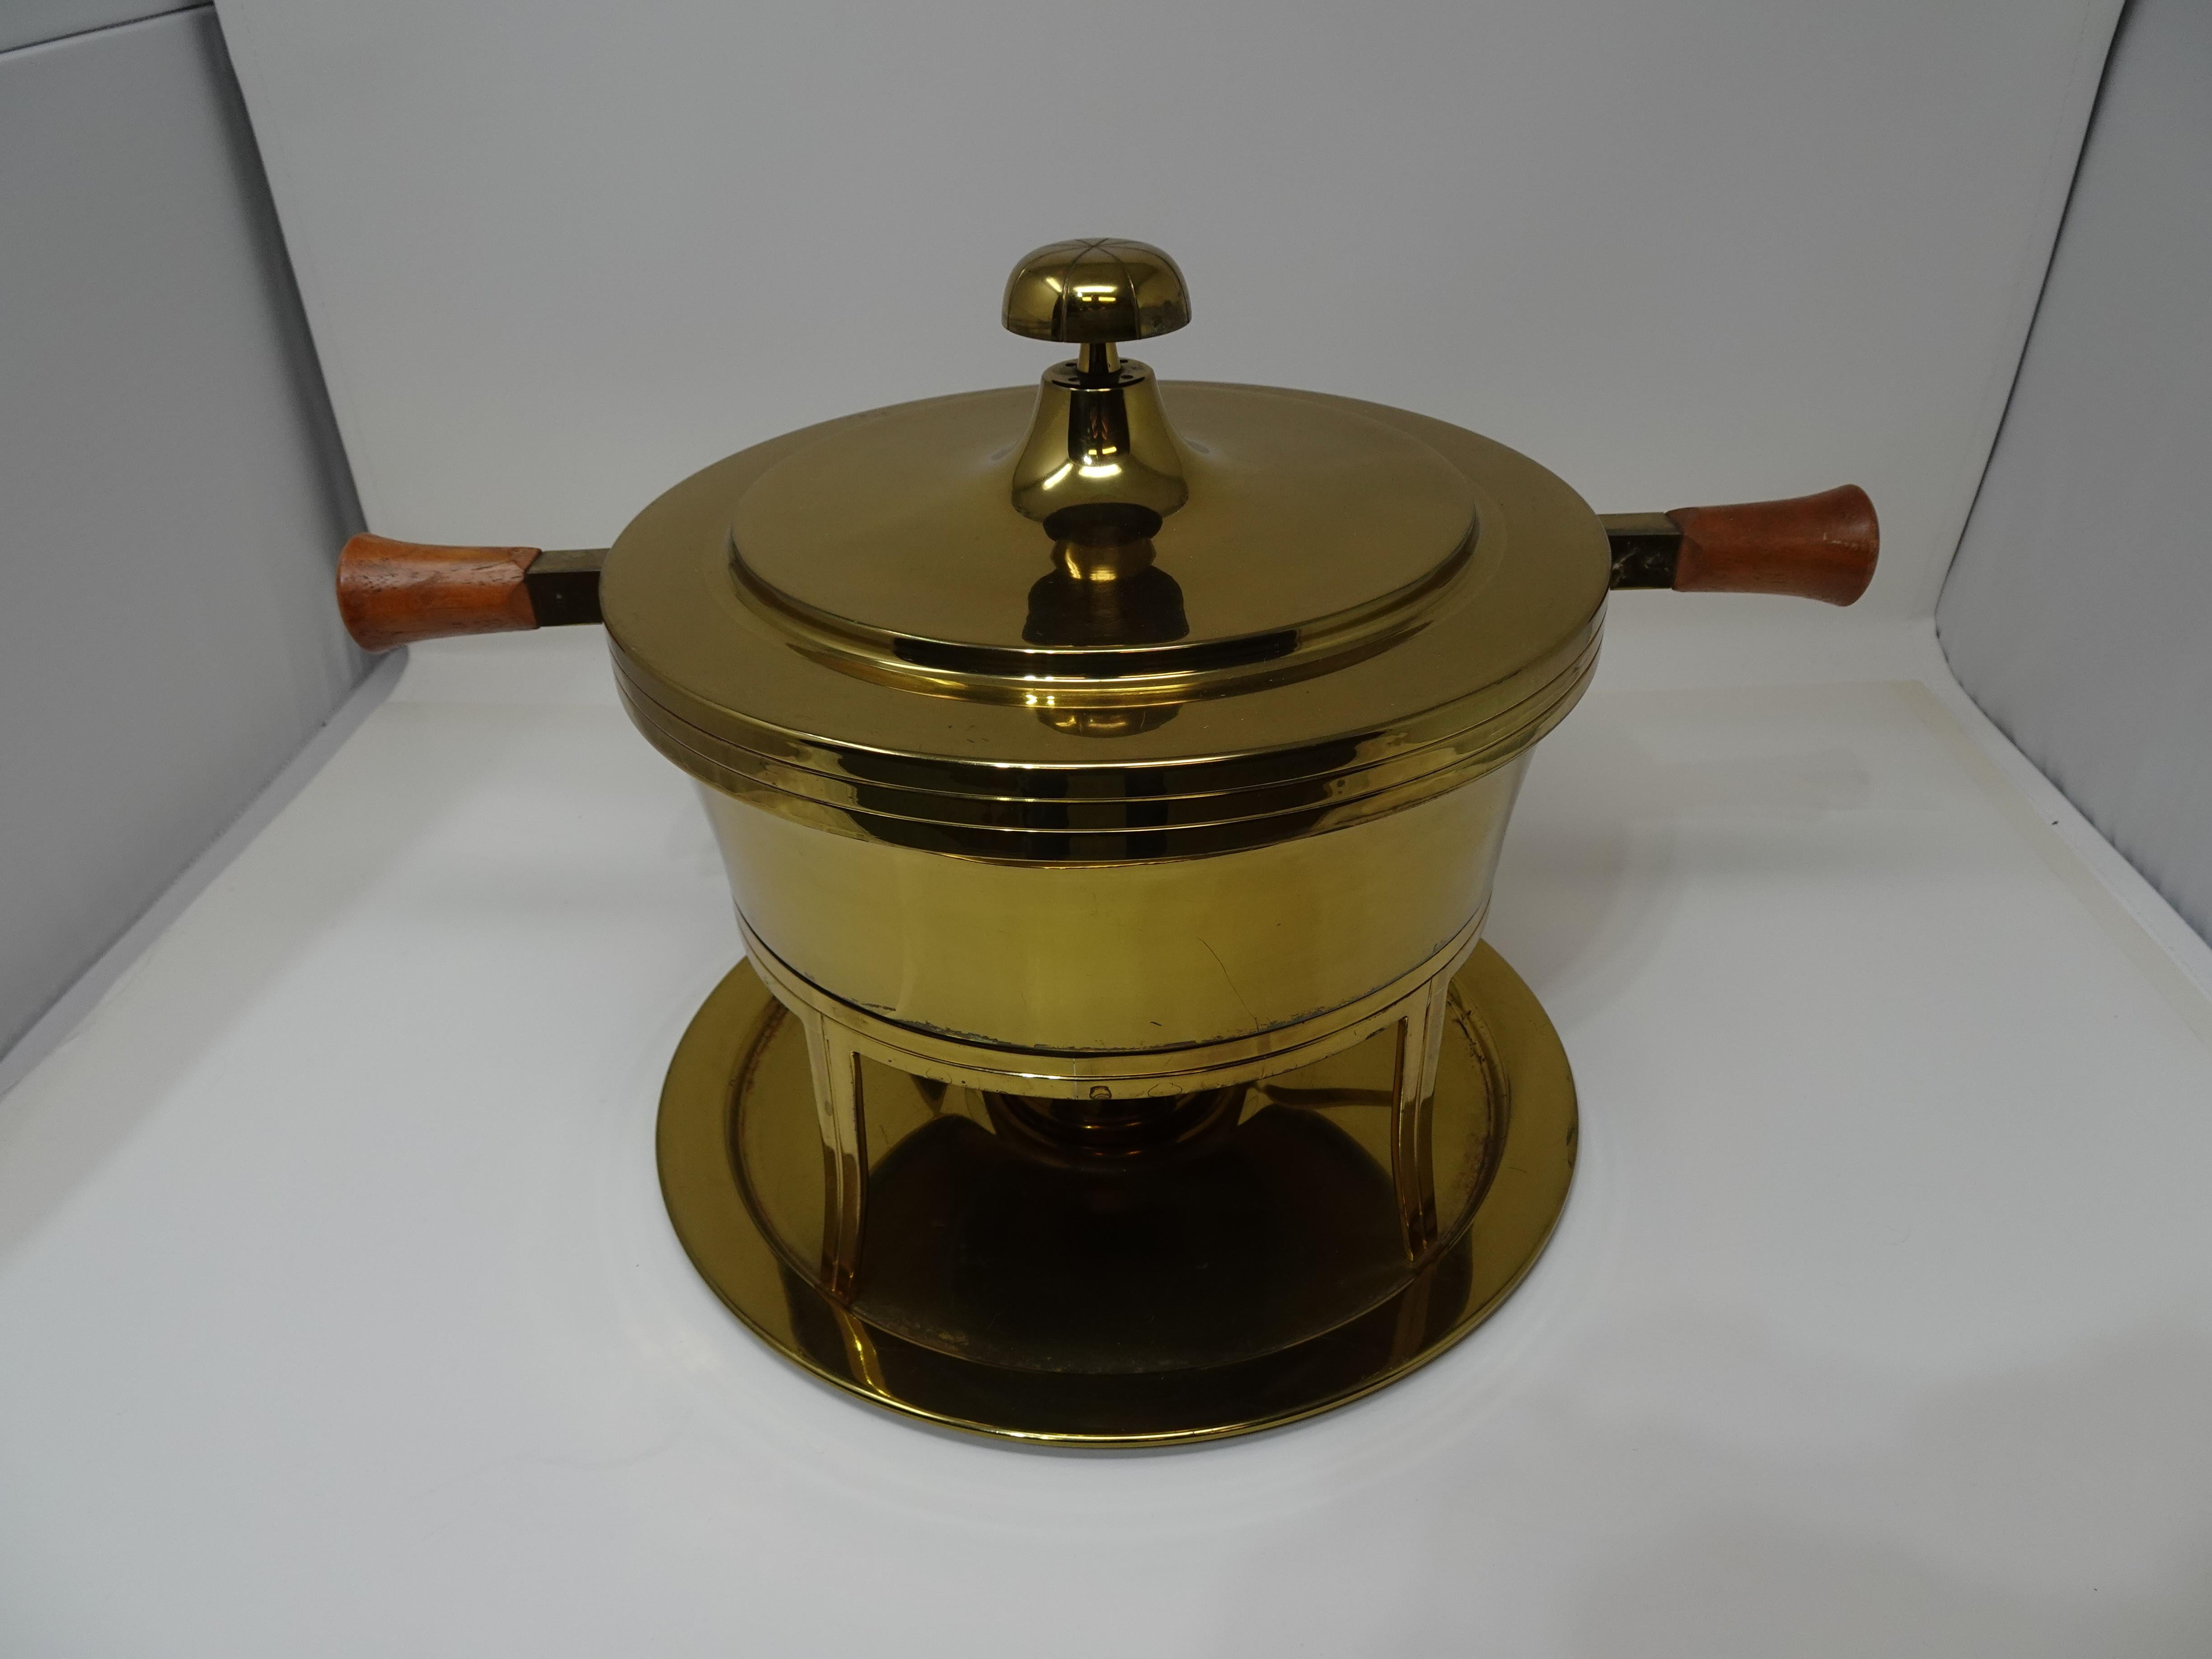 A nice Parzinger chaffing dish containing six pieces the lid with wood handles topped with a mushroom knob , body having the rare inner Pyrex glass insert, matching stand, burner and tray. Retains the manufactures imprint to bottom plate by Dorlyn